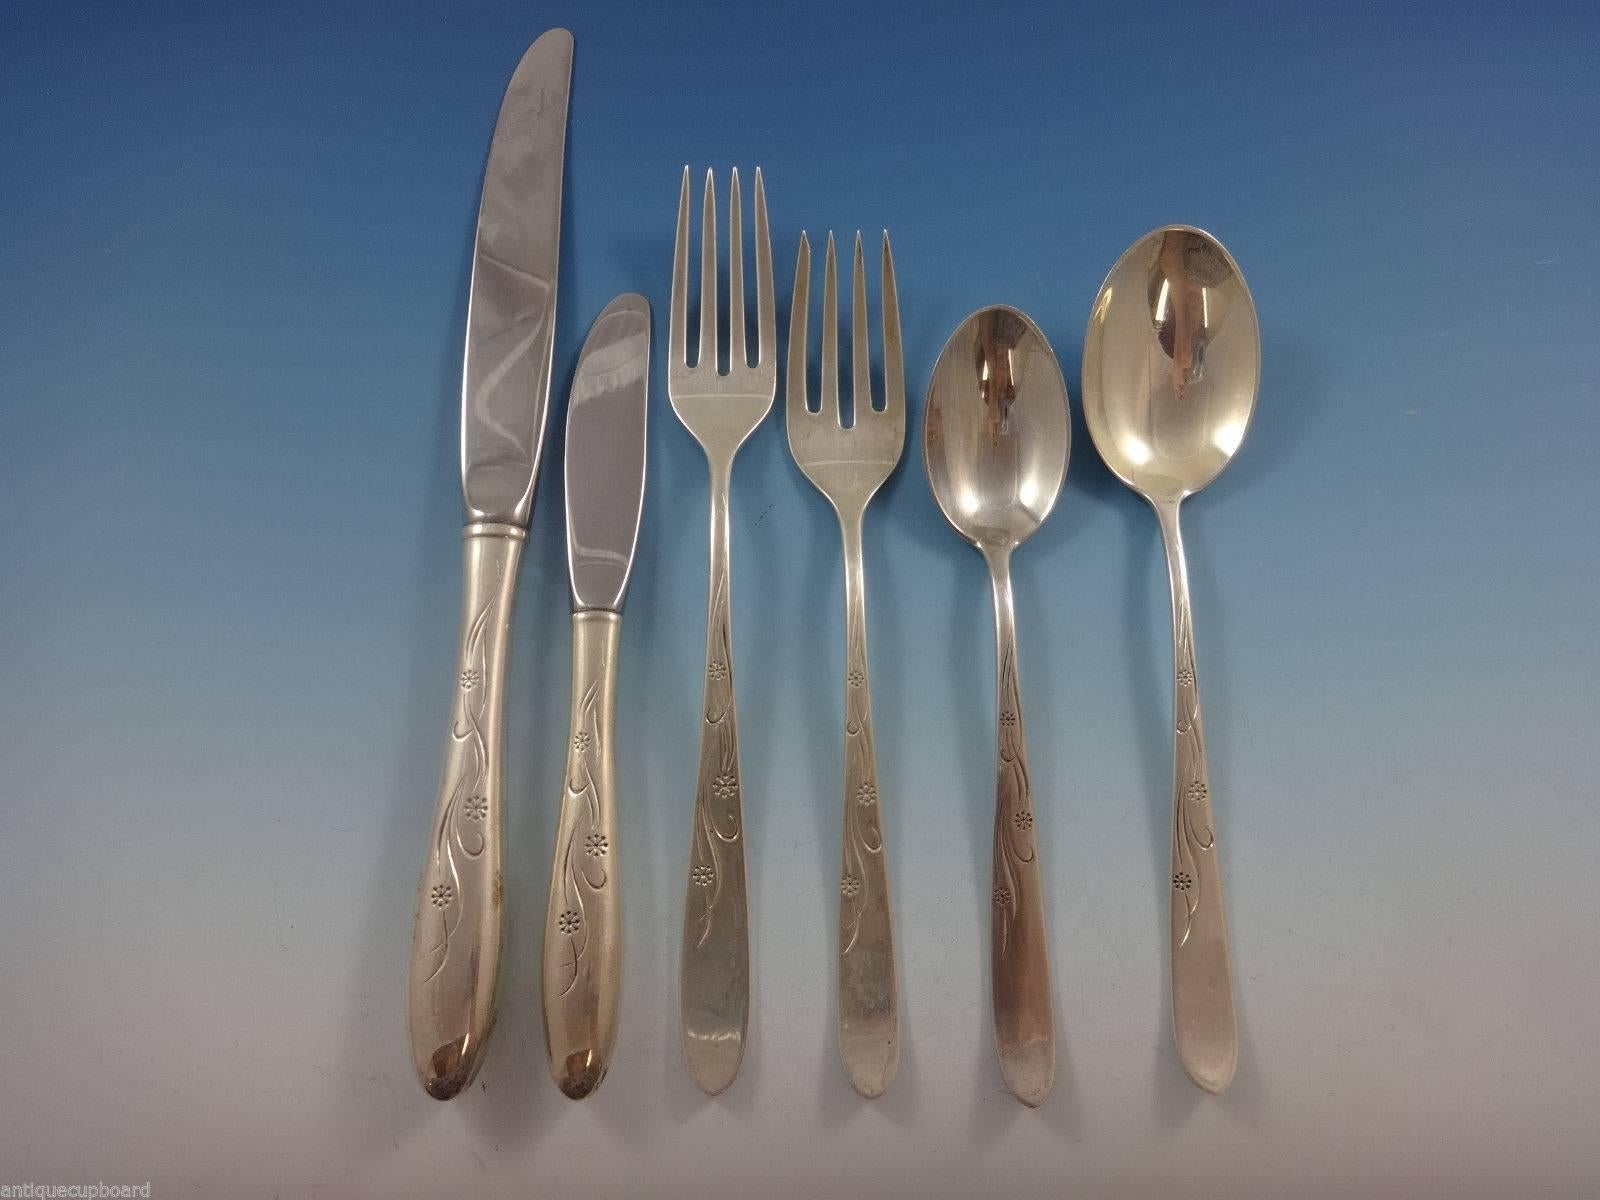 Lovely Cynthia Engraved by Kirk sterling silver flatware set of 77 pieces. This set includes:

12 knives, 9 1/8